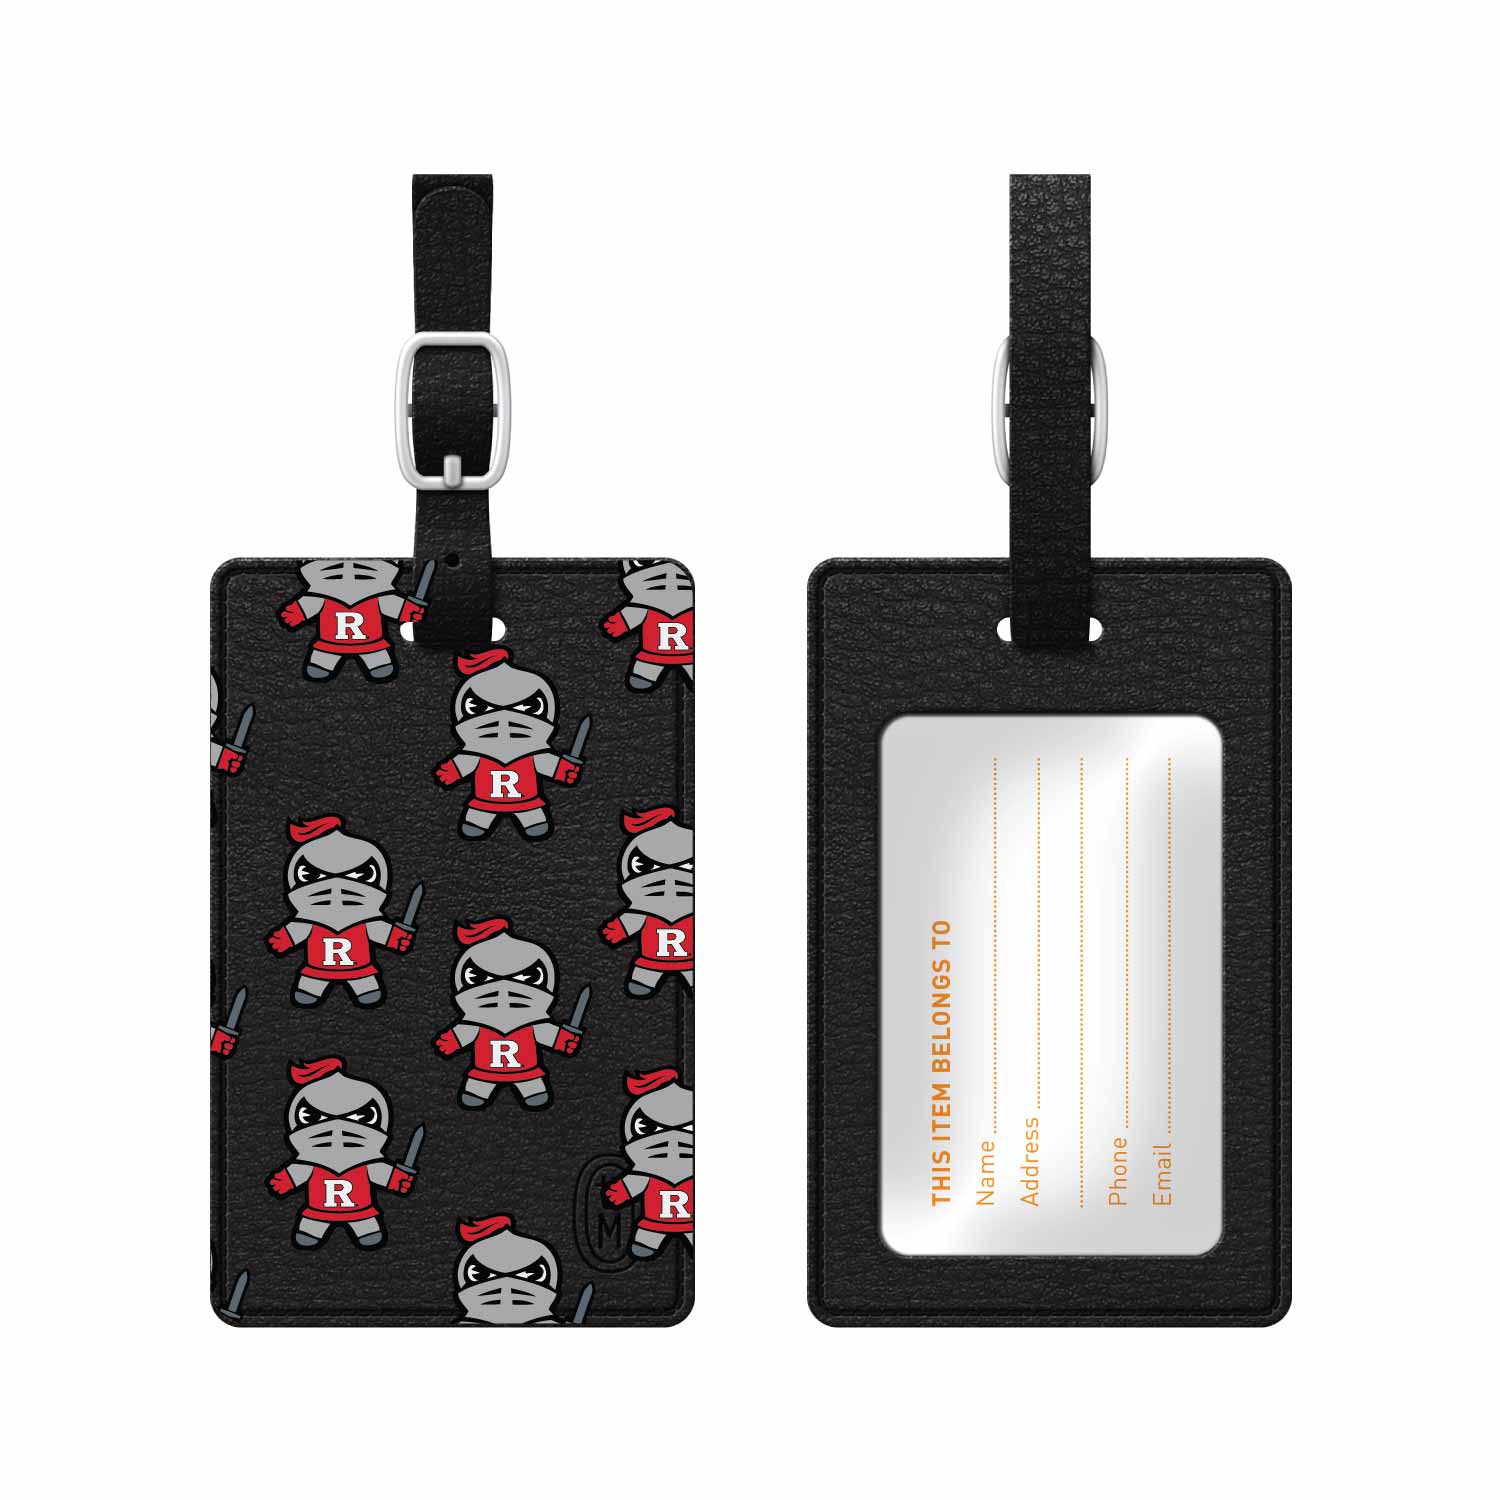 Rutgers University Faux Leather Luggage Tag, Tokyodachi Mascot